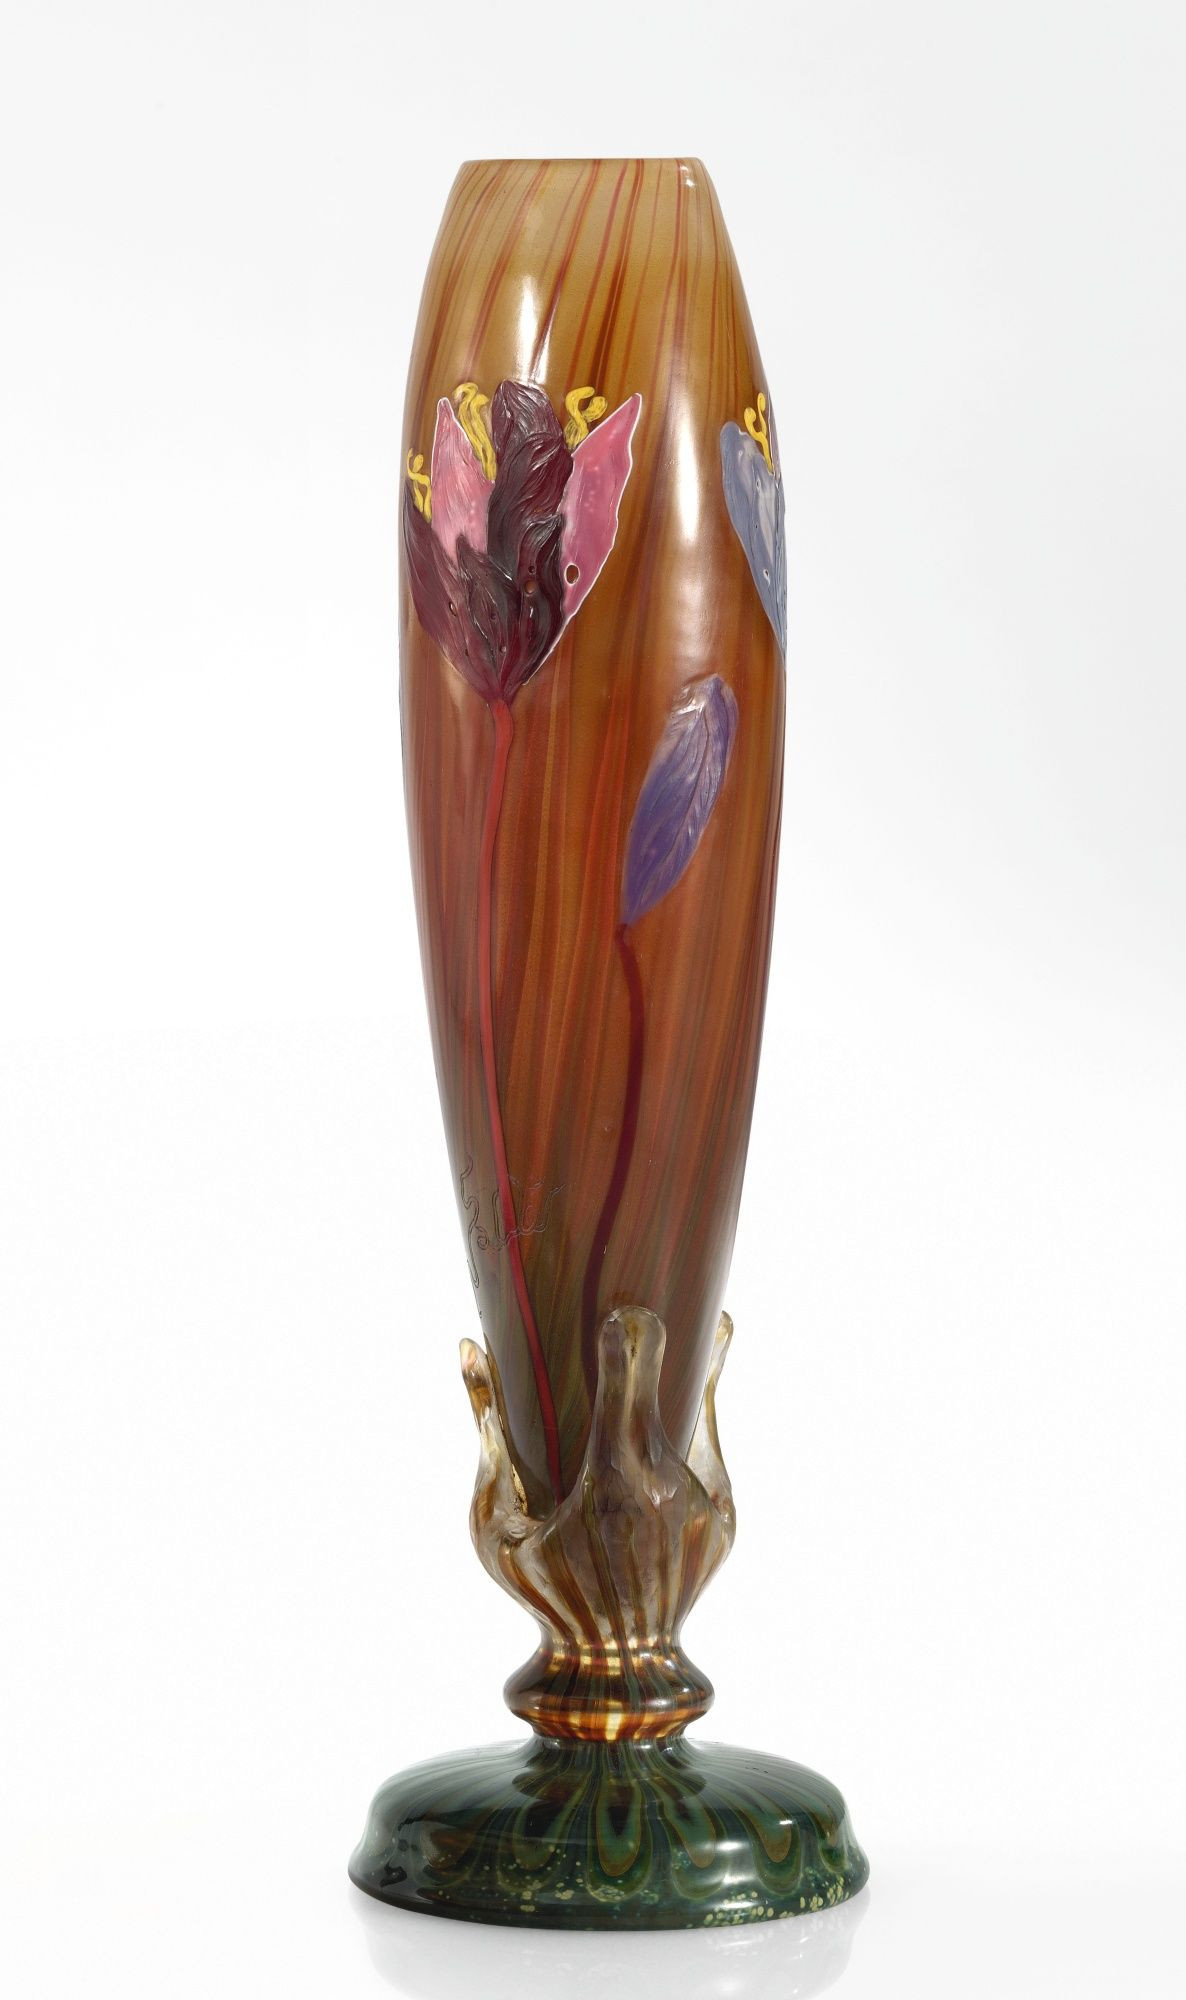 modern art glass vase of emile galla crocus vase signed galla internally decorated with with emile galla crocus vase signed galla internally decorated with wheel carved cameo glass and marqueterie sur verre